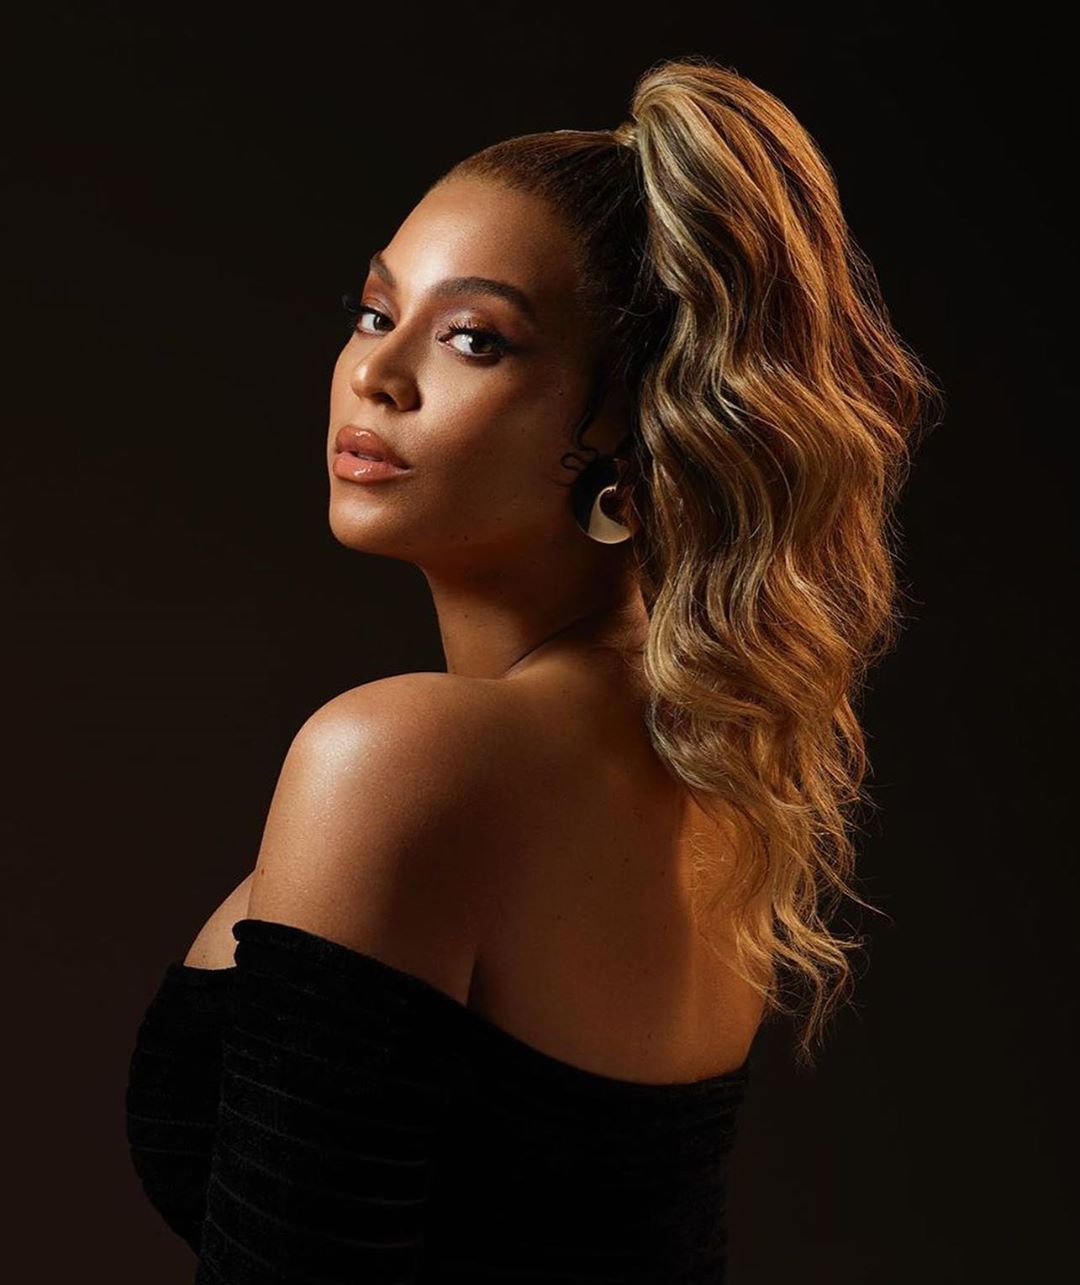 beyslegend shared a photo on Instagram: “Beyoncé announced on her website the 'Black Parade Route', publicizing. Beyonce photohoot, Beyonce hair, Beyonce queen